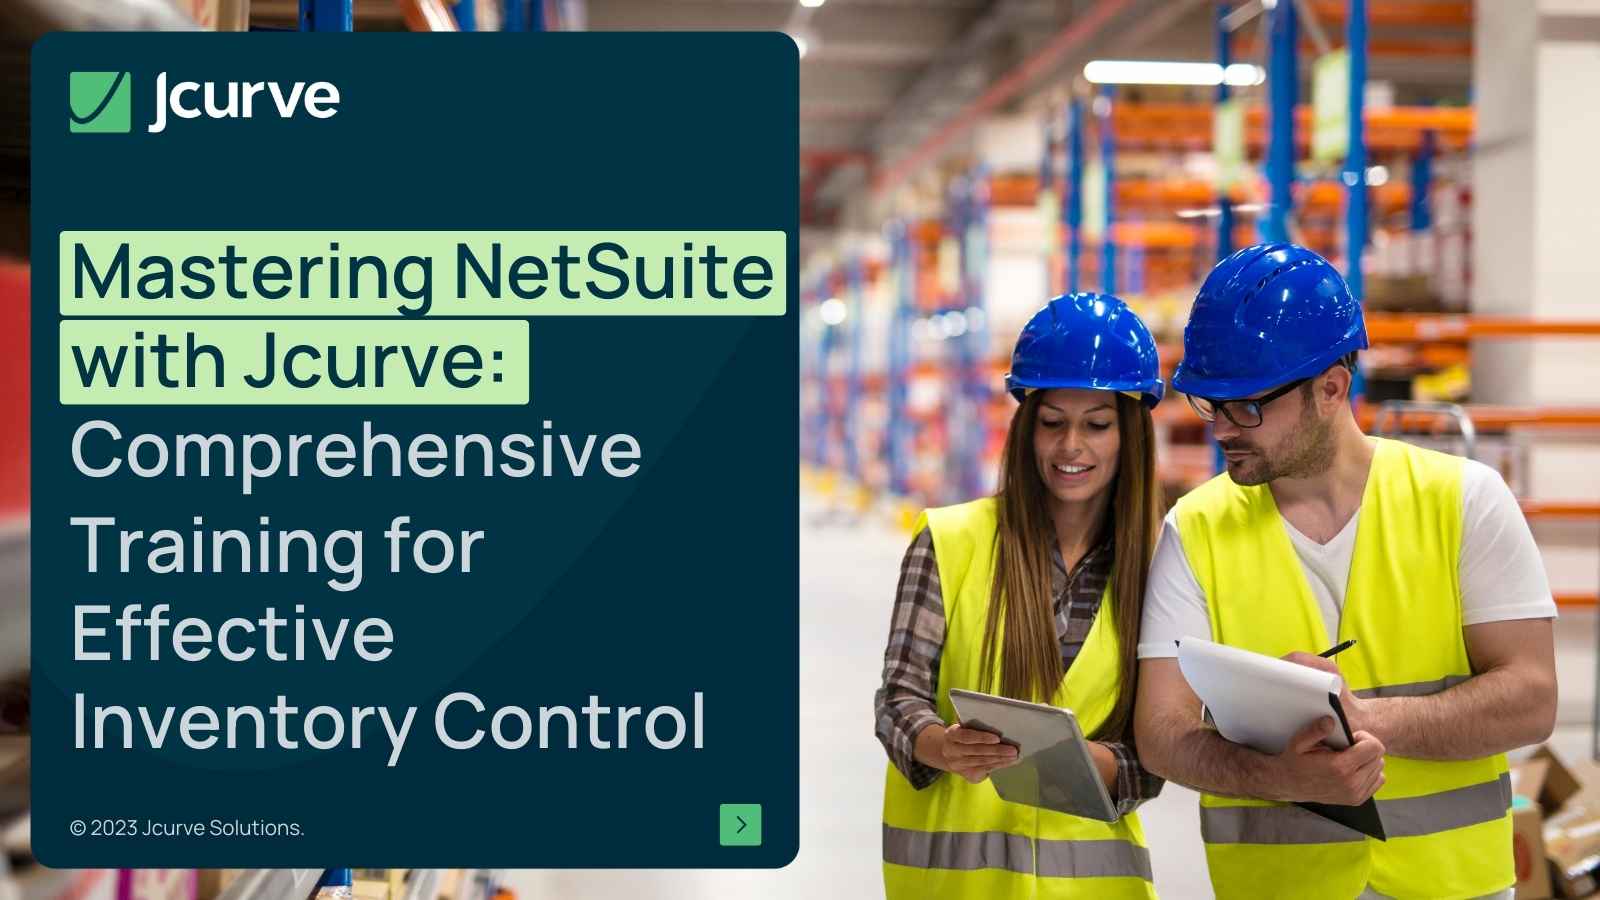 Mastering NetSuite with Jcurve: Comprehensive Training for Effective Inventory Control